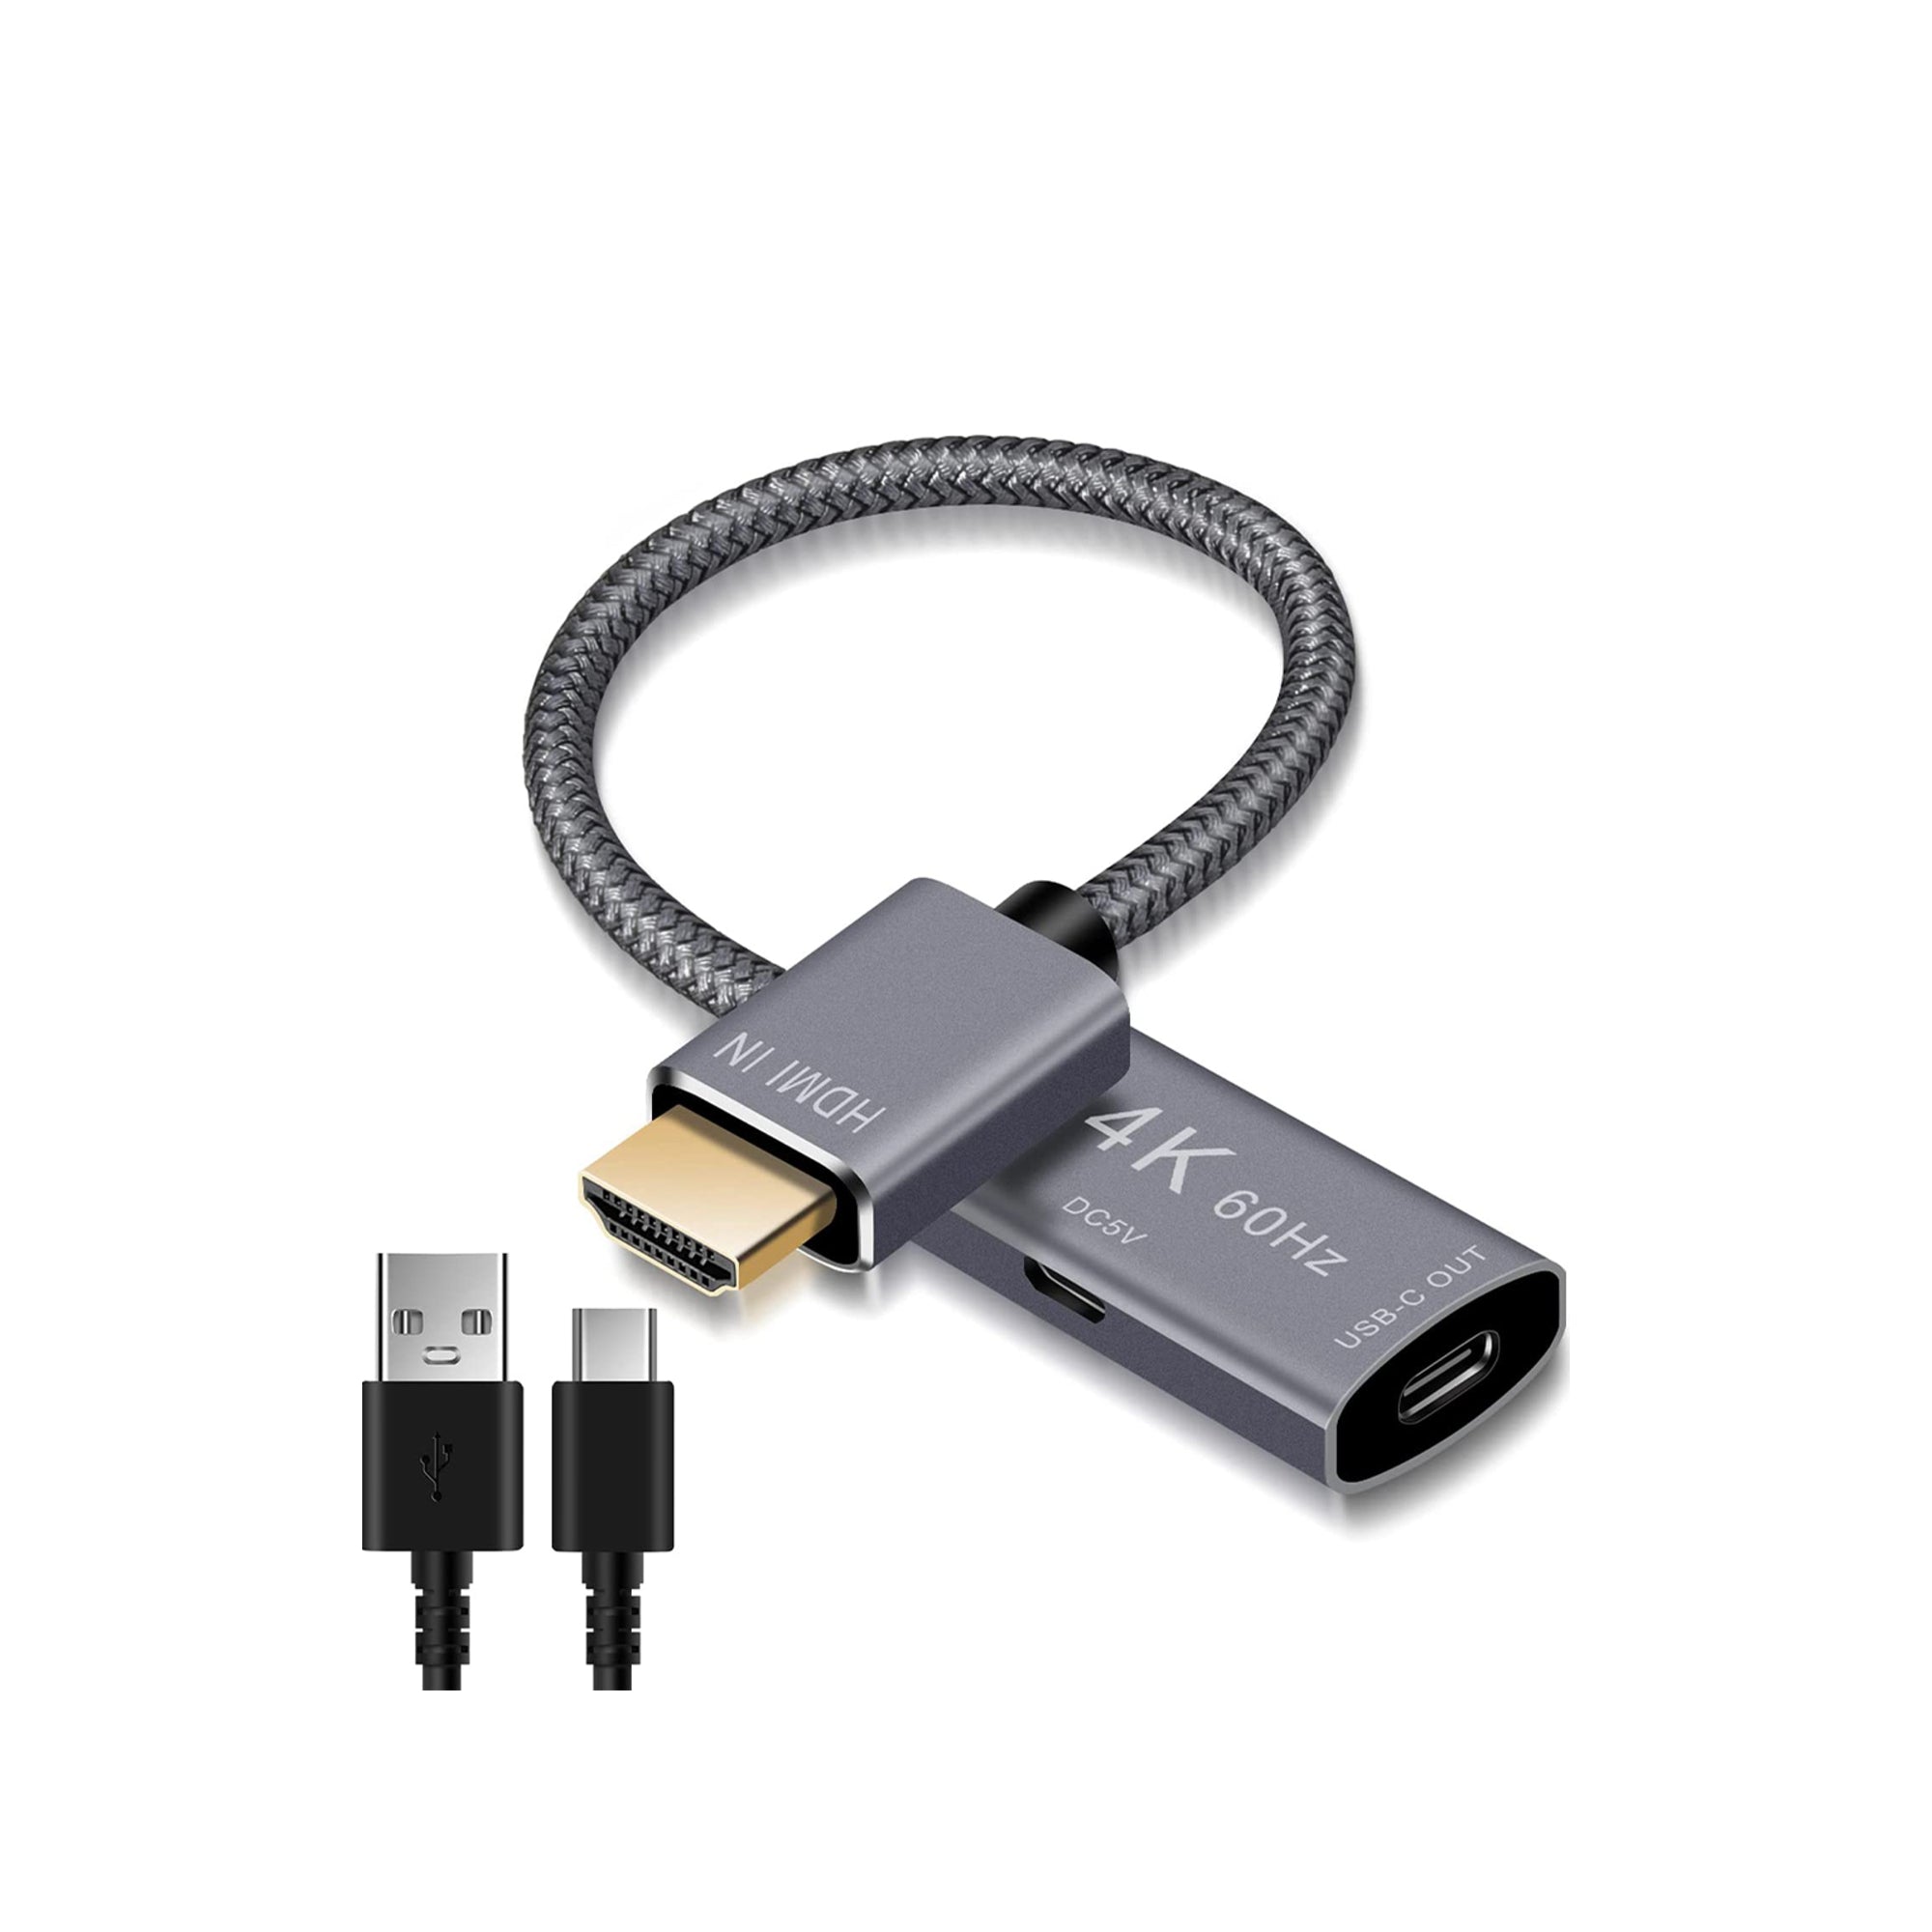 BestWhoop HDMI Male to USB-C Female Cable Adapter with Micro USB Power Cable